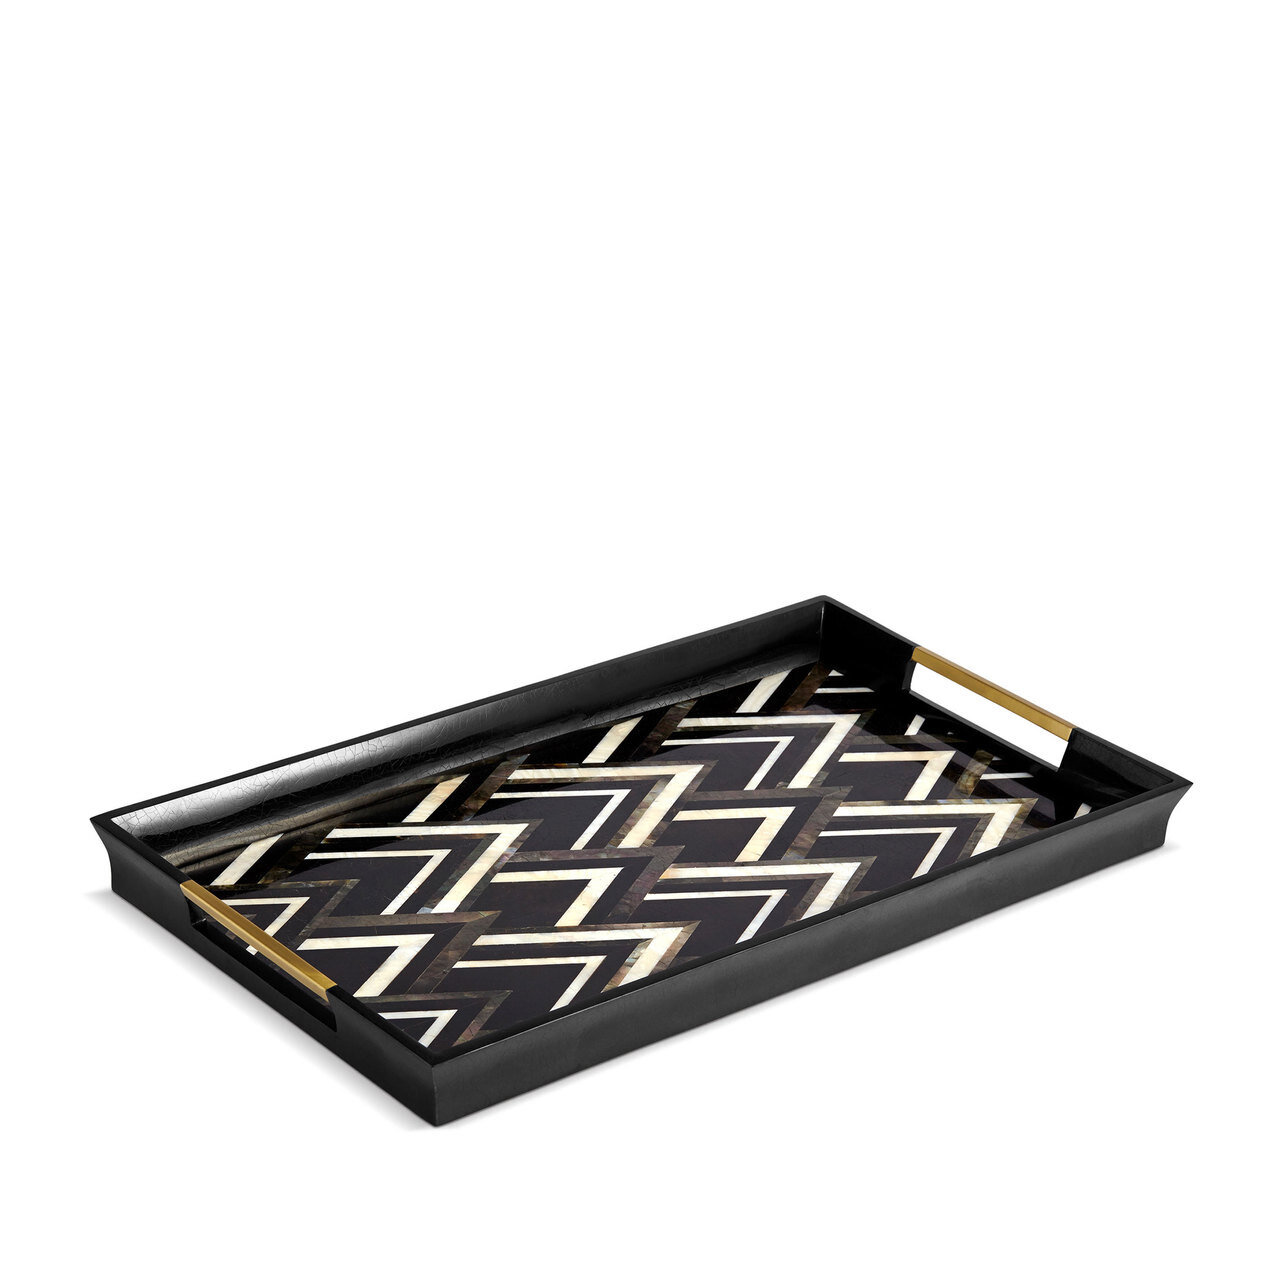 L'Objet Deco Noir Rectangular Tray Black with Grey with White Natural Shells Large